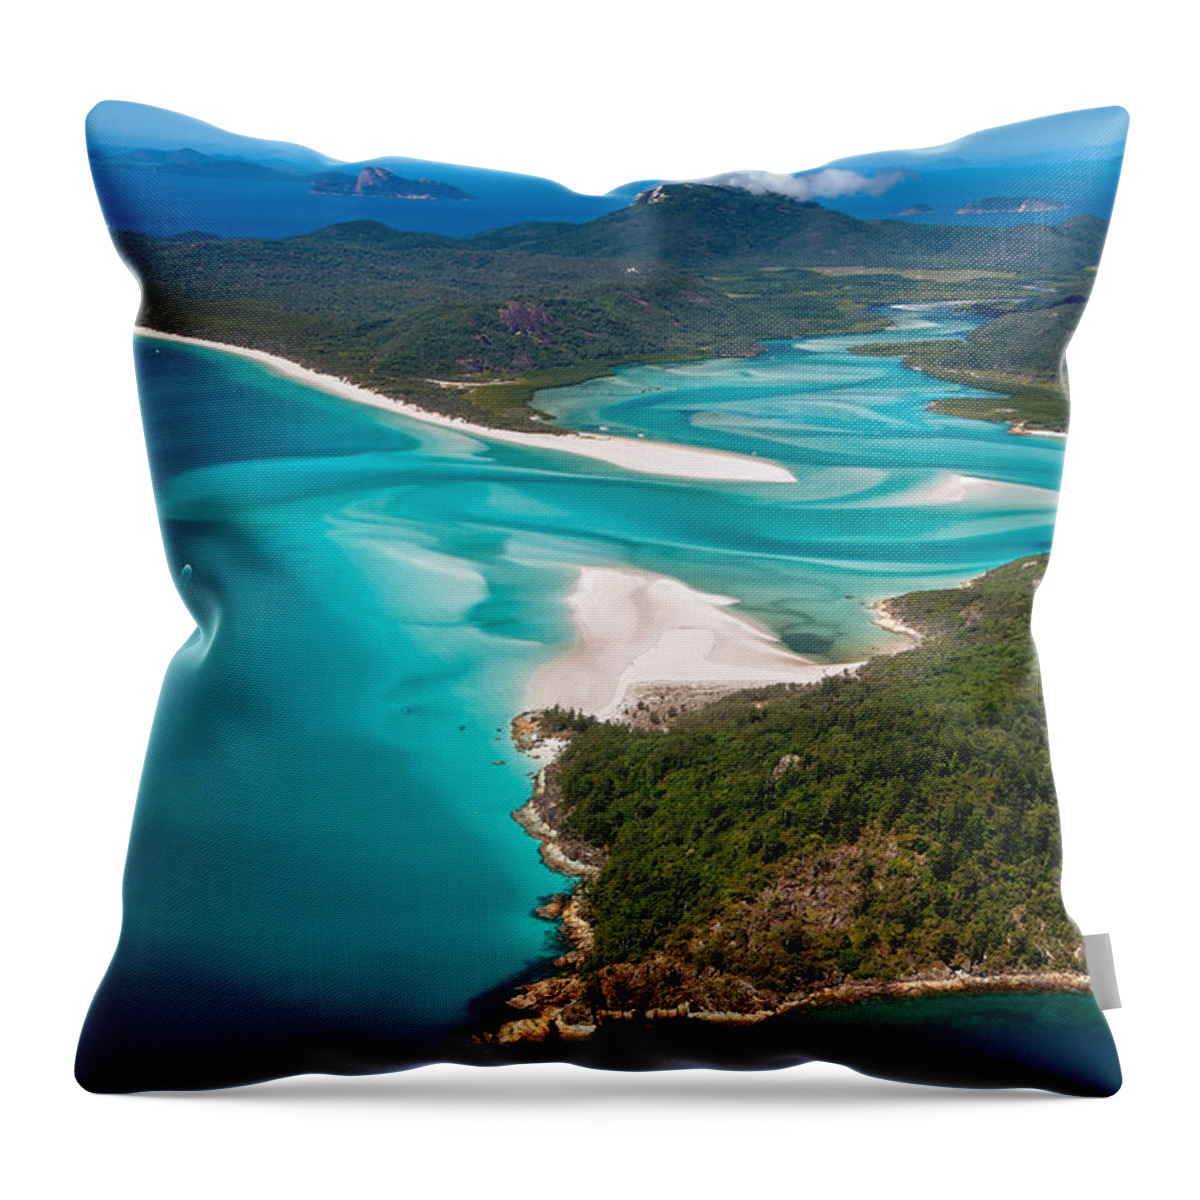 Whitsundays Throw Pillow featuring the photograph Australia - Whitsundays by Olivier Parent